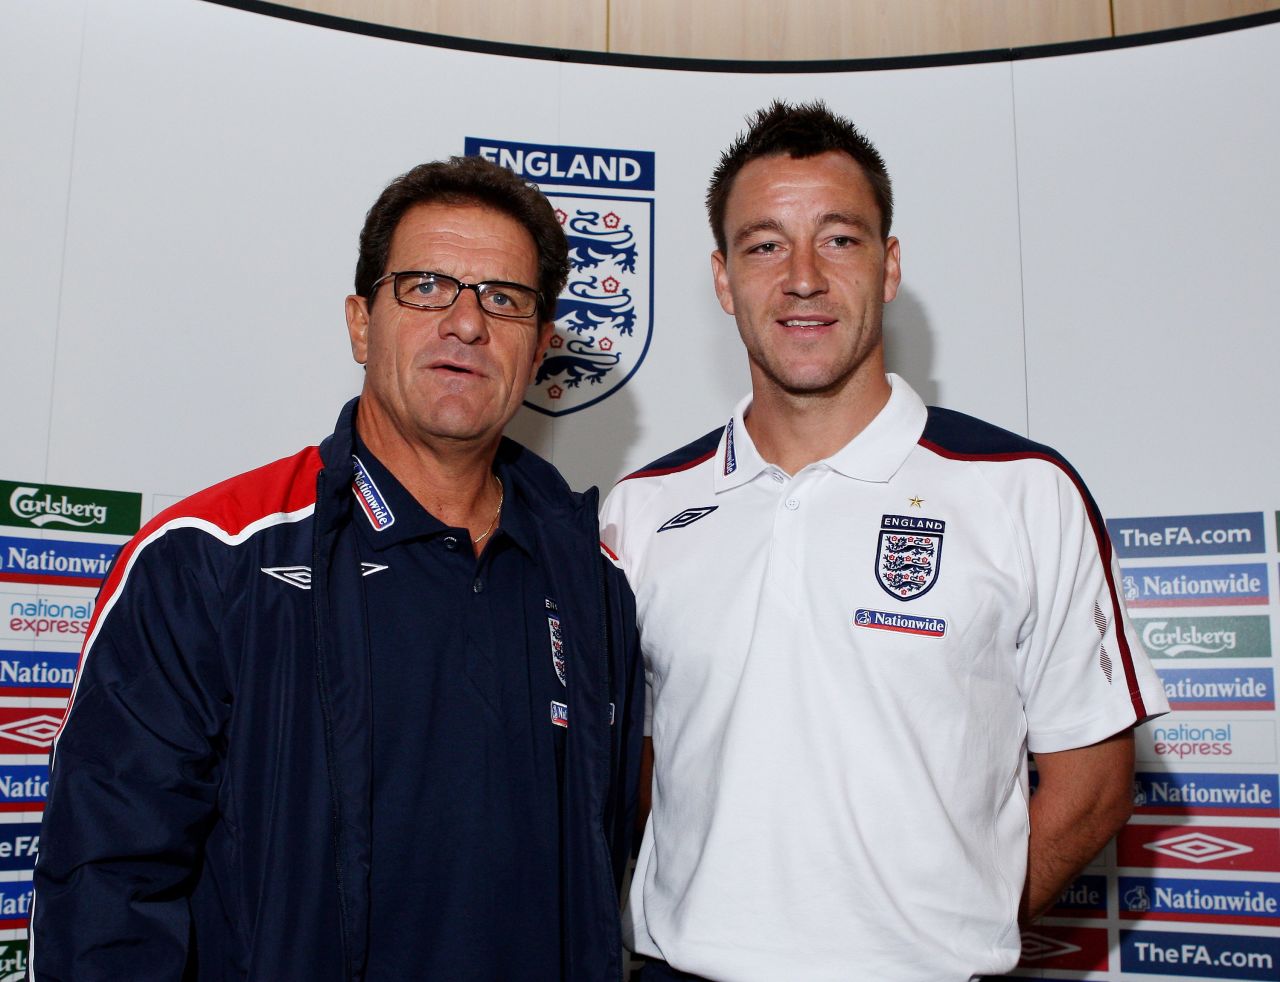 Capello stripped Chelsea's John Terry of the England captaincy in February 2010 after newspaper allegations about his private life. Terry was reinstated as captain in 2011.